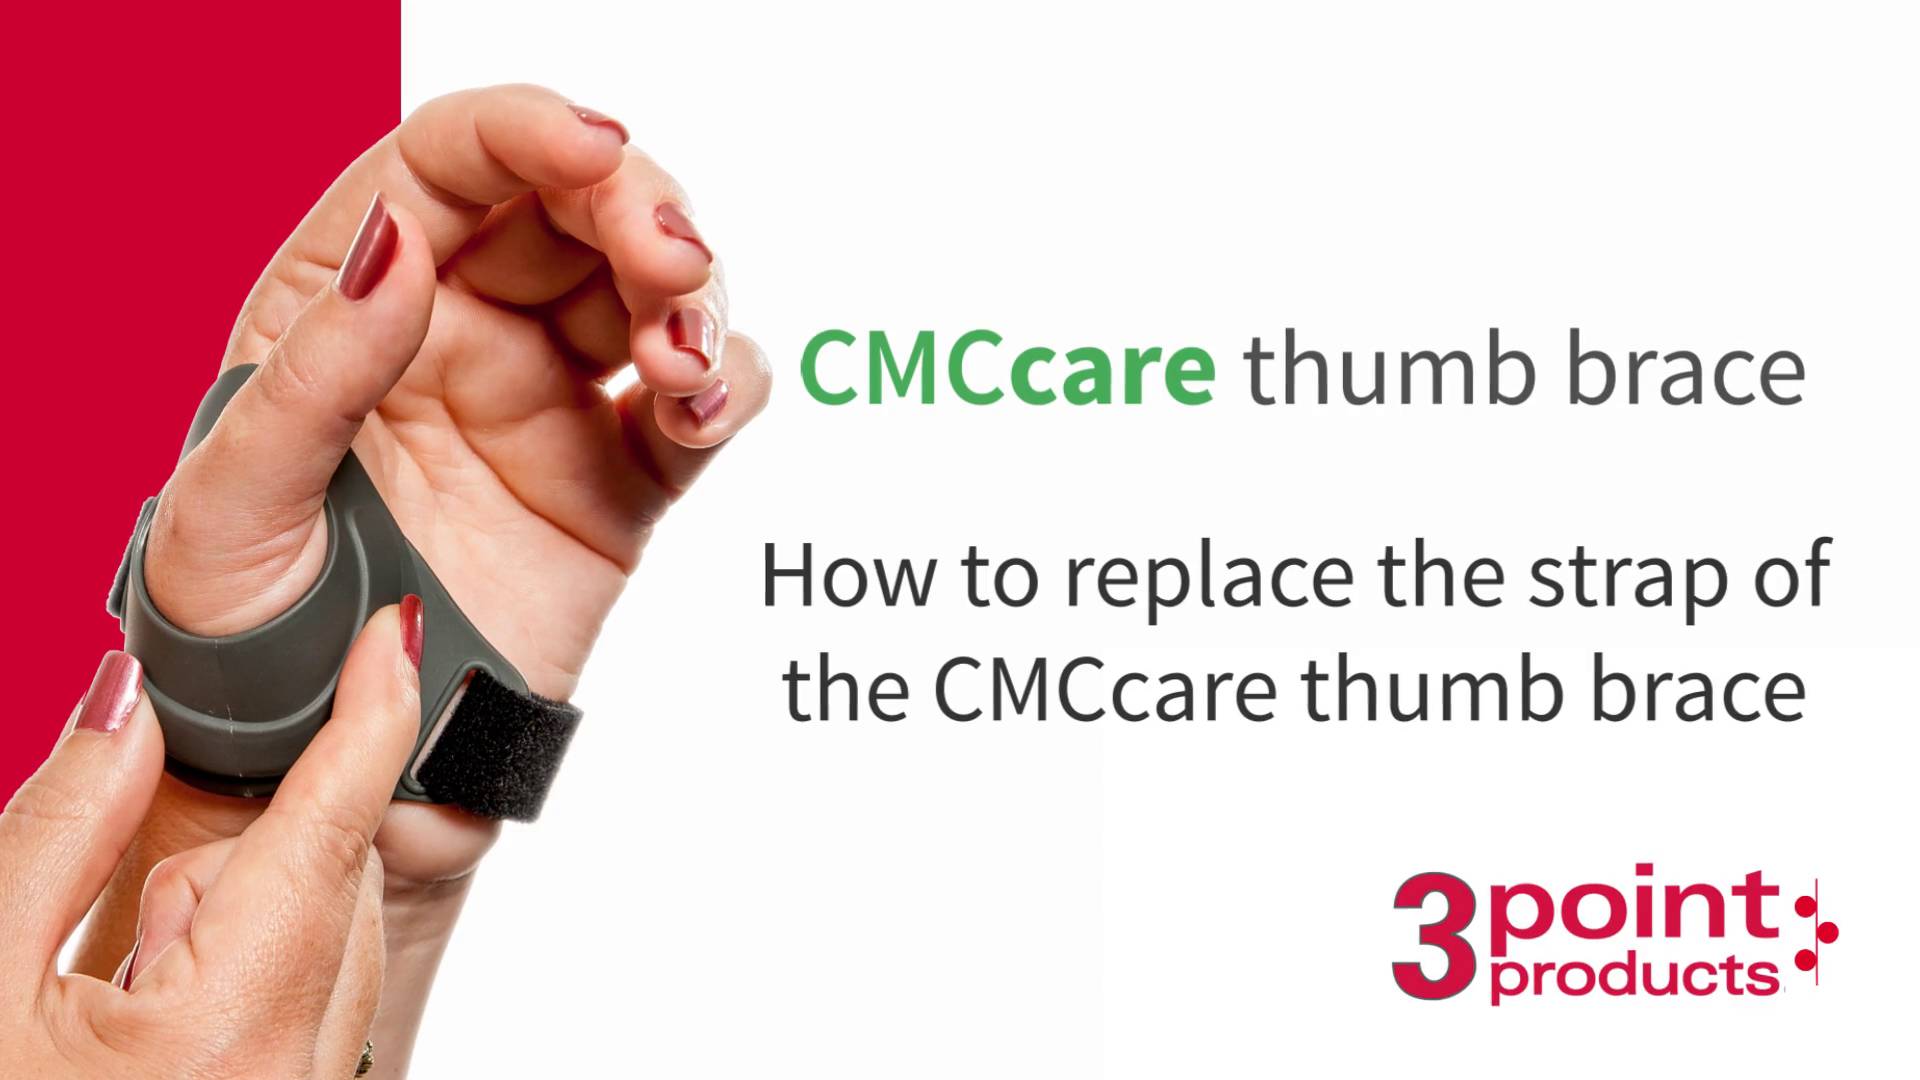 How to Replace the CMCcare Thumb Brace Strap